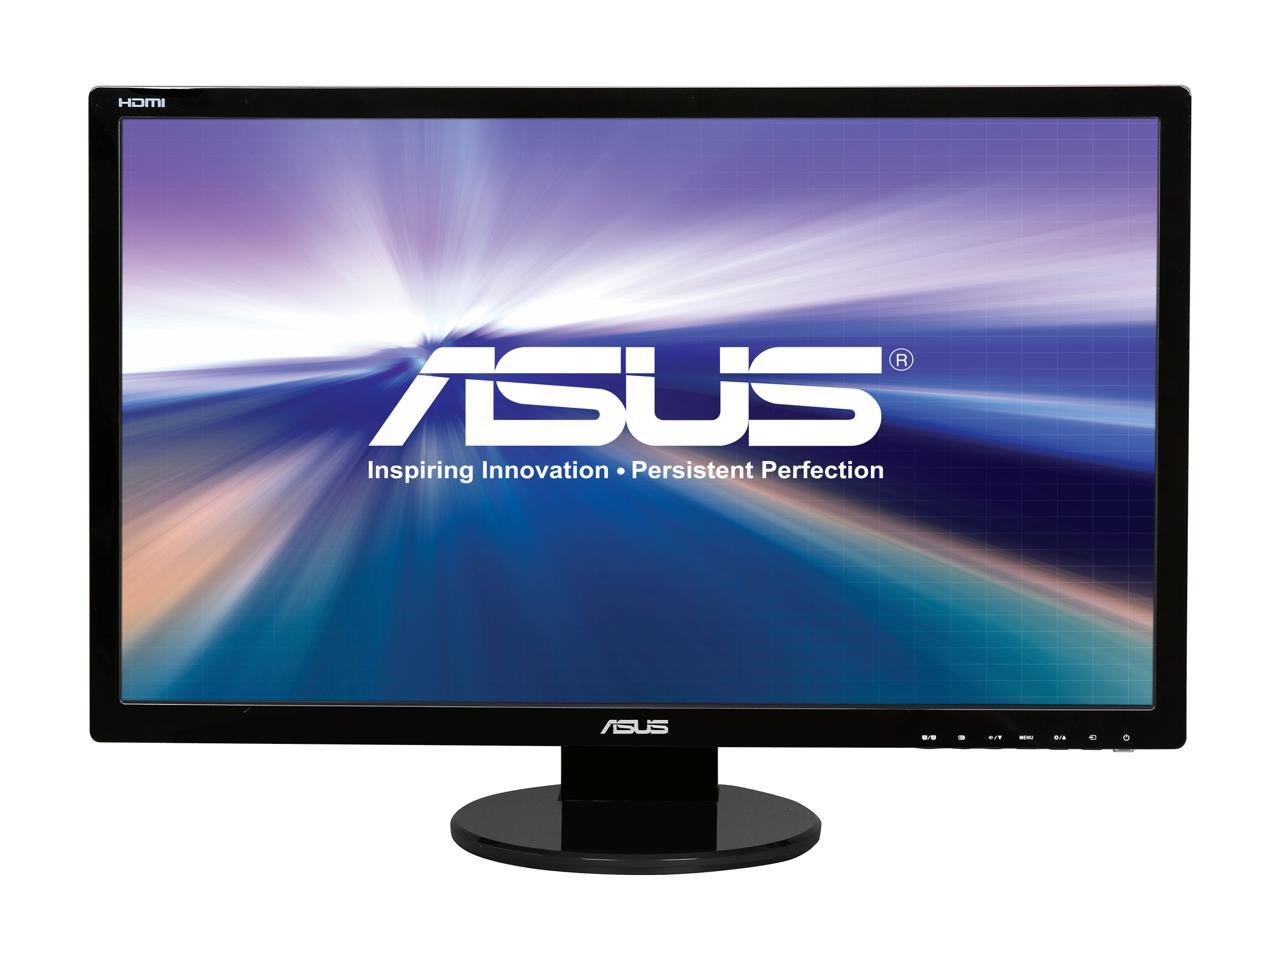 ASUS VE278H 27" Full HD 1920 x 1080 VGA HDMI Asus Eye Care with Ultra Low-Blue Light & Flicker-Free Built-in Speakers LED Backlight LCD Monitor